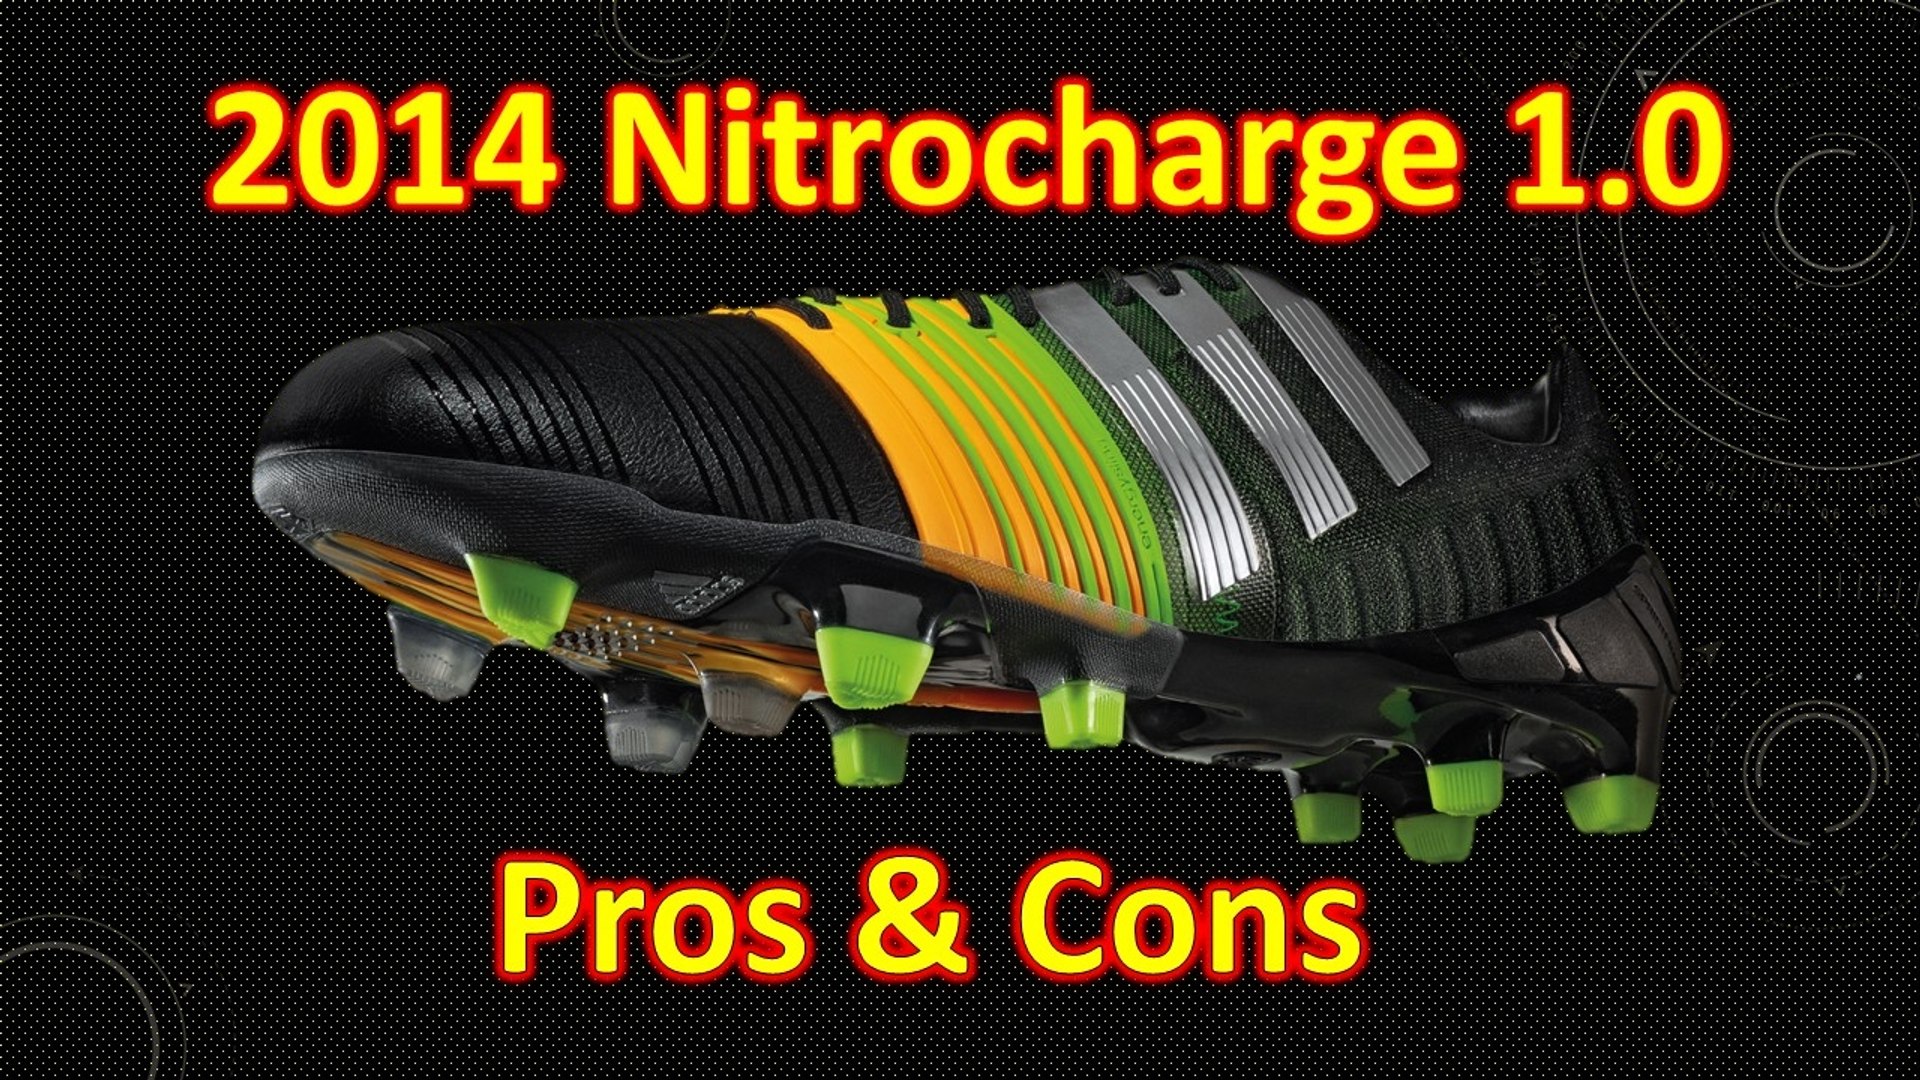 Adidas Nitrocharge 1.0 2 (2014) Review - Pros & Cons - video Dailymotion